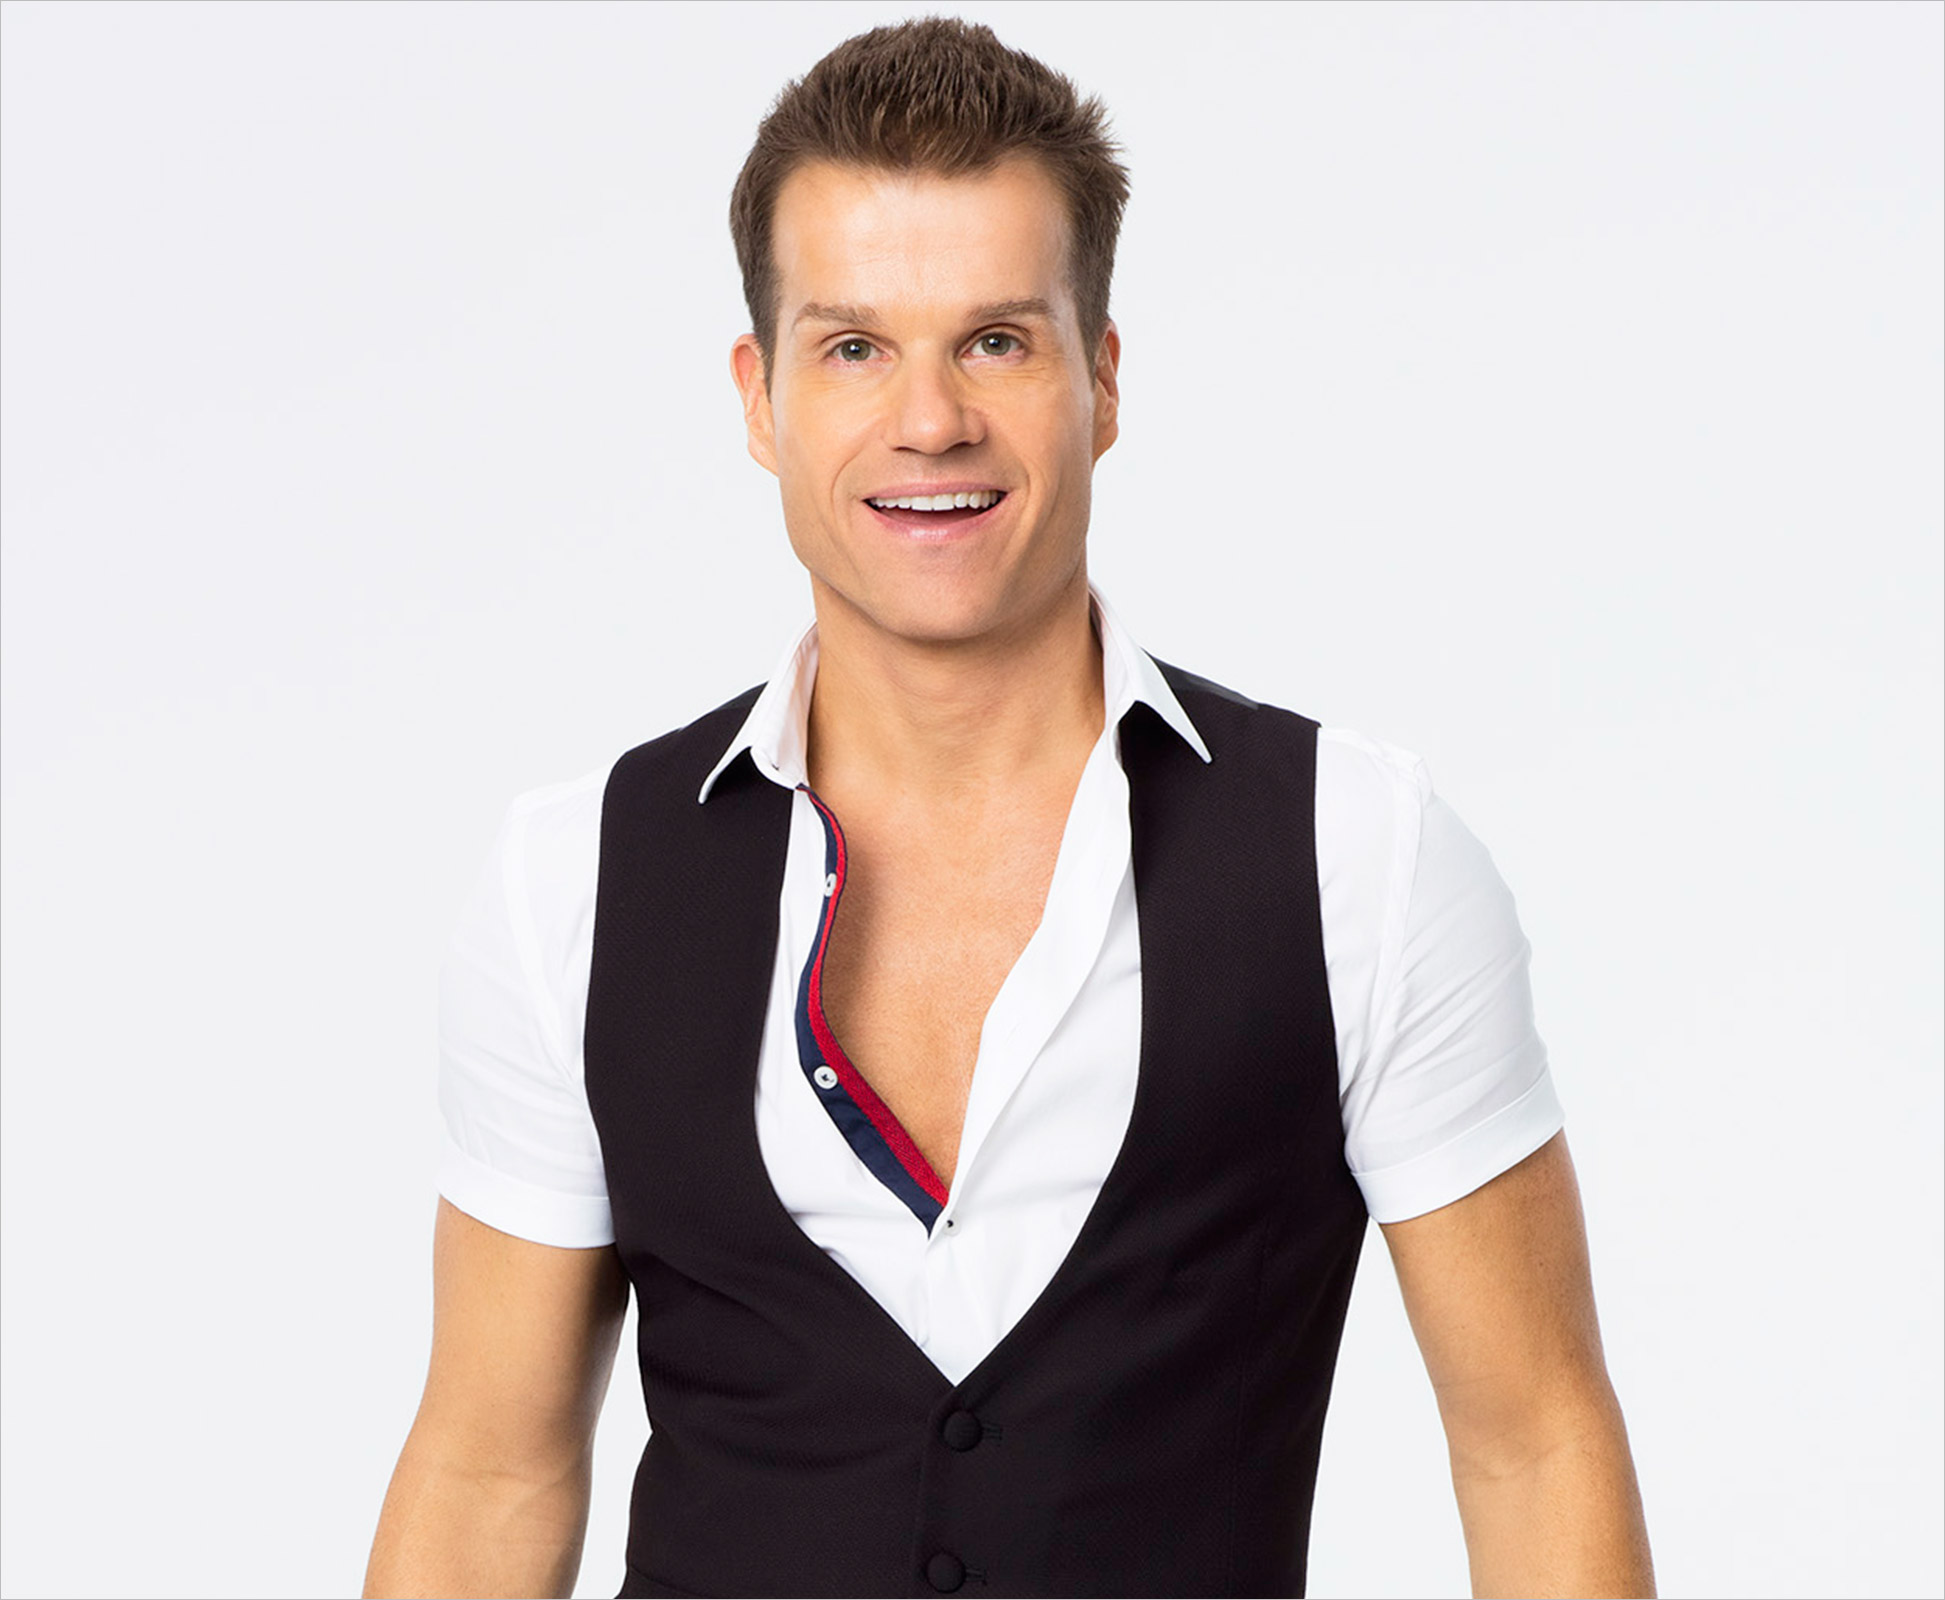 DWTS': Louis Van Amstel Weighs In On the Best (and Worst) Pairs From Week 1